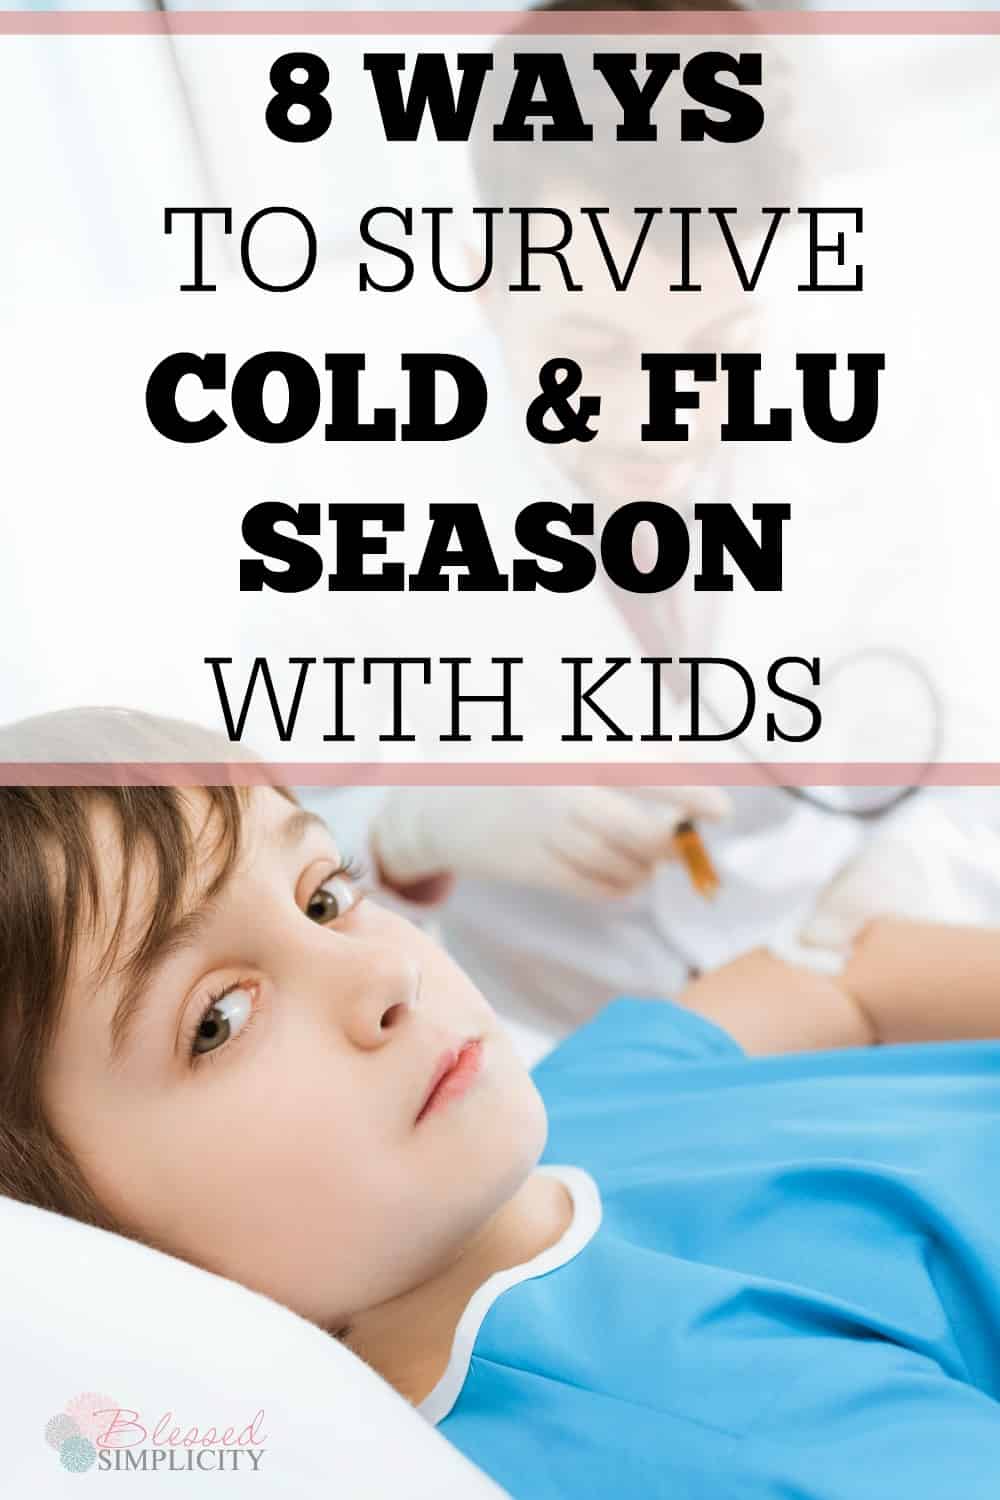 When cold and flu season sets in, these are great tips for surviving and staying healthy with kids. #coldandflu #familyhealth